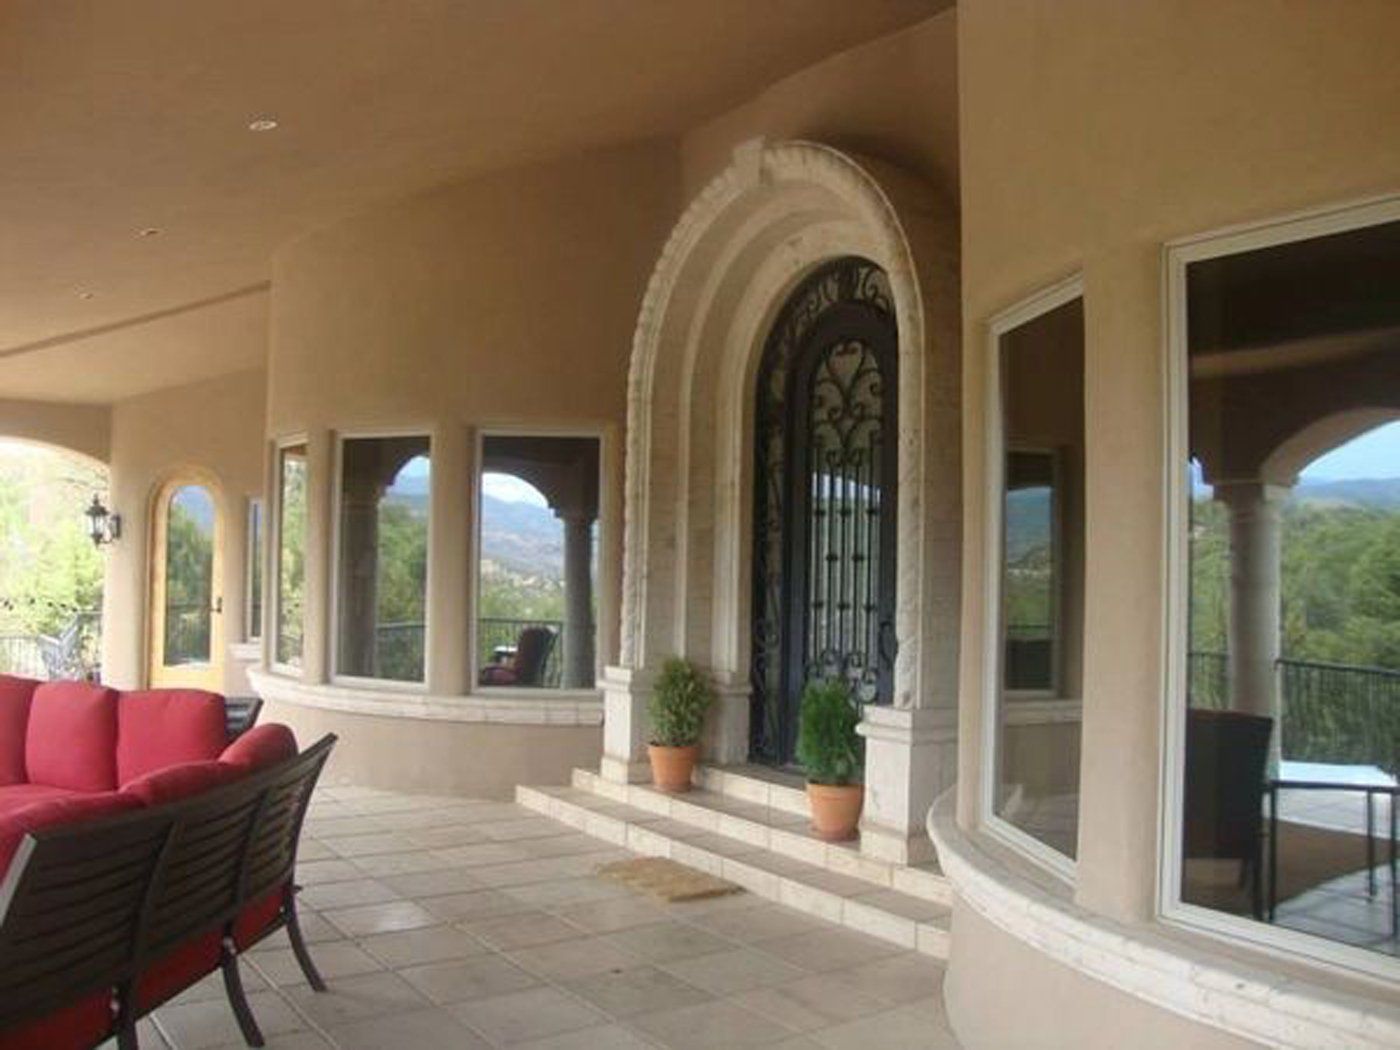 Residential Window | Albuquerque, NM | The Tint Company